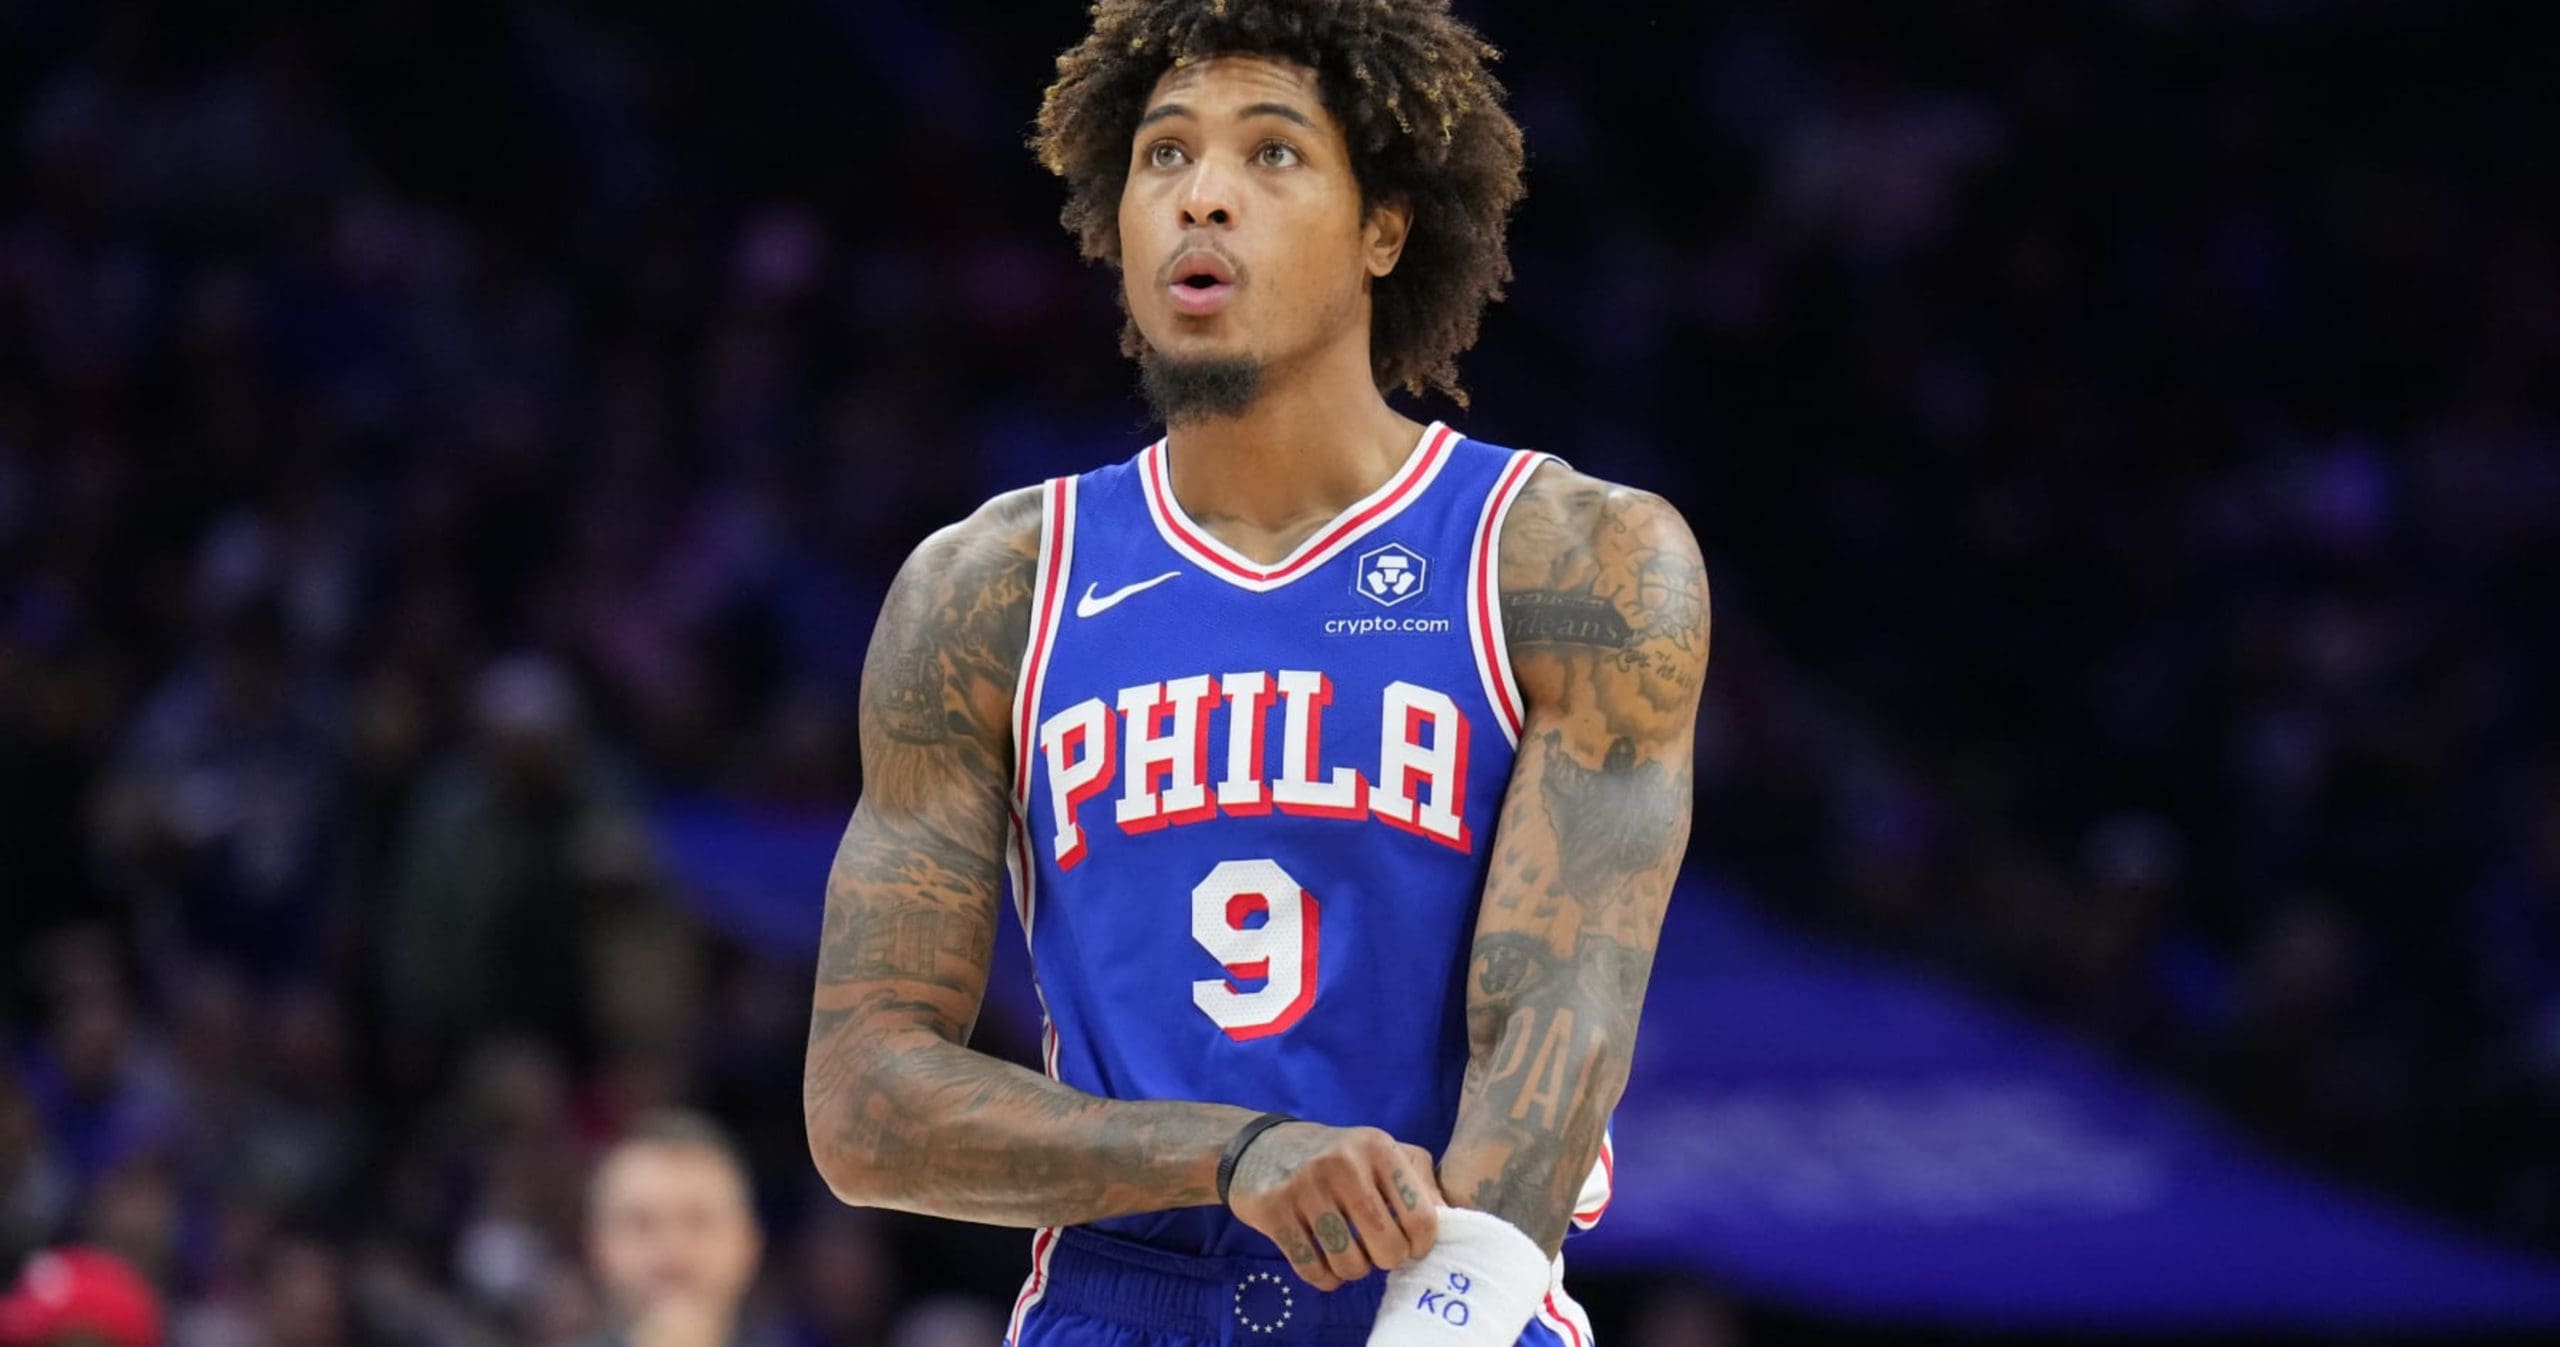 76ers’ Kelly Oubre Struck By Vehicle, Hospitalized With Injuries And Is Expected To Miss ‘Significant Time’